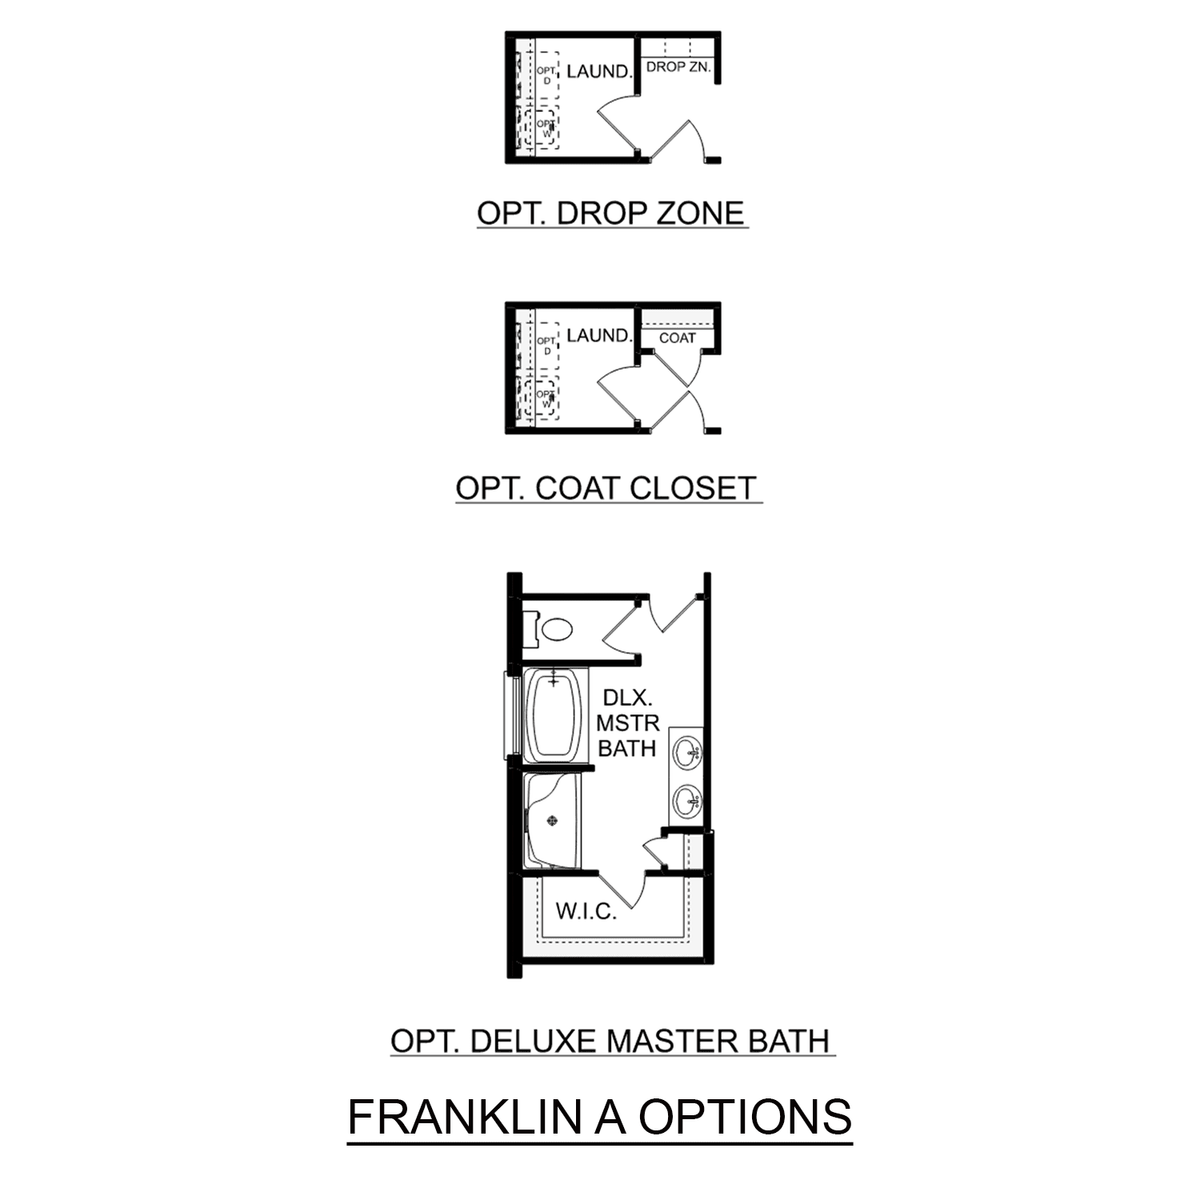 2 - The Franklin floor plan layout for 26684 Kyle Lane in Davidson Homes' Ricketts Farm community.